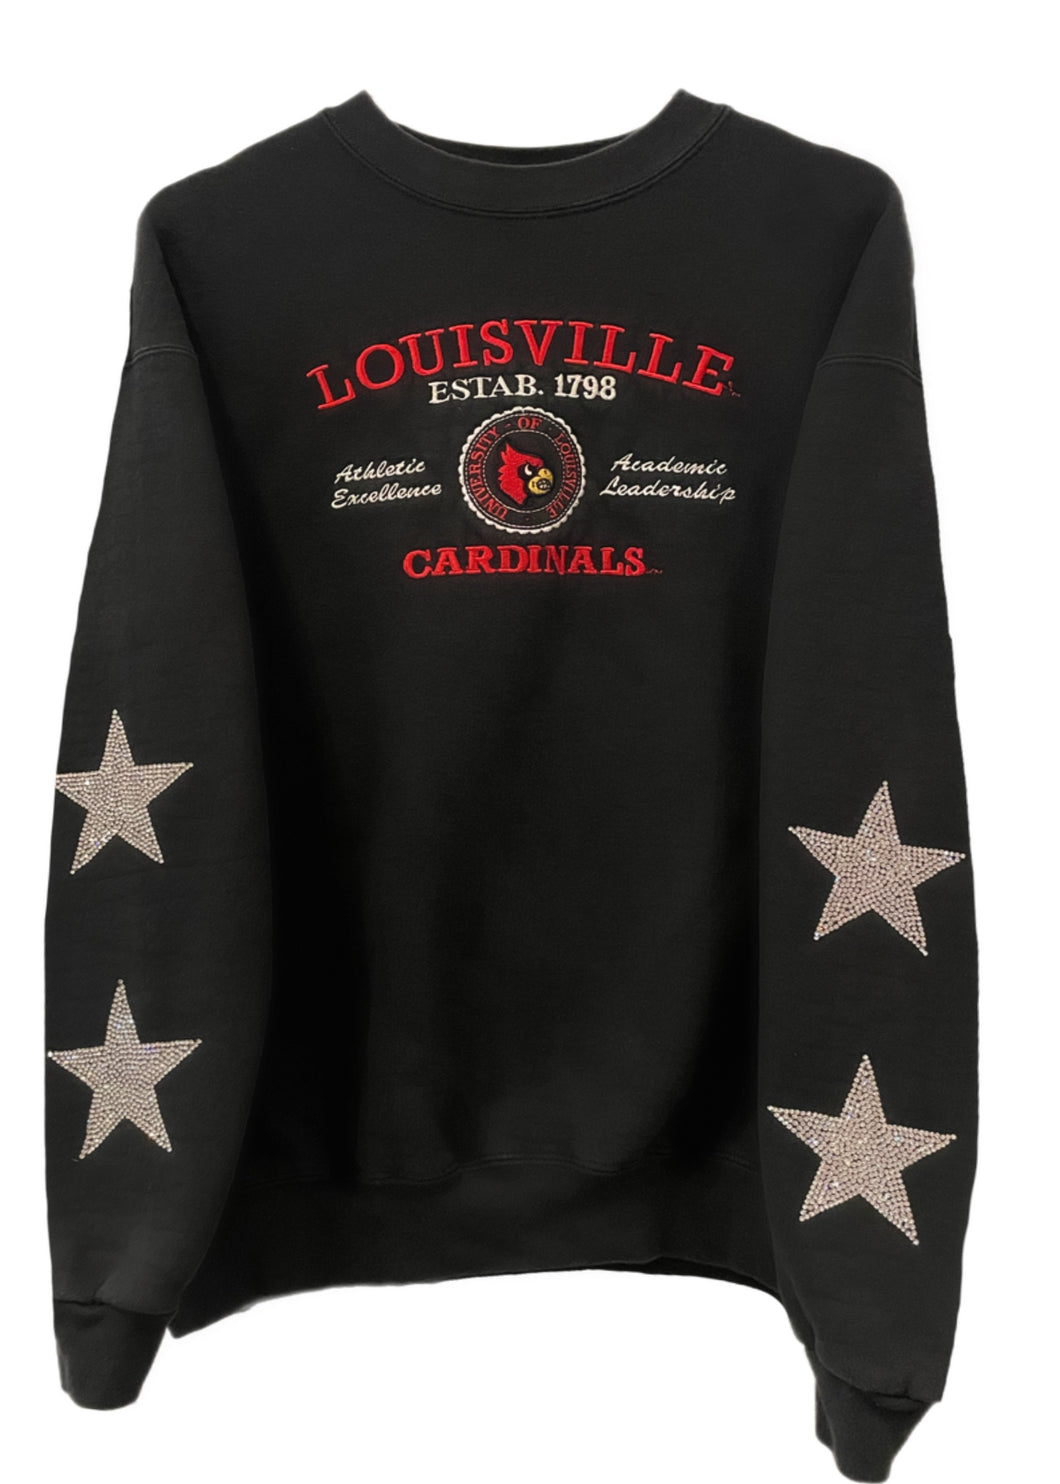 University of Louisville, Cardinals, One of a KIND Vintage Sweatshirt with Crystal Star Design